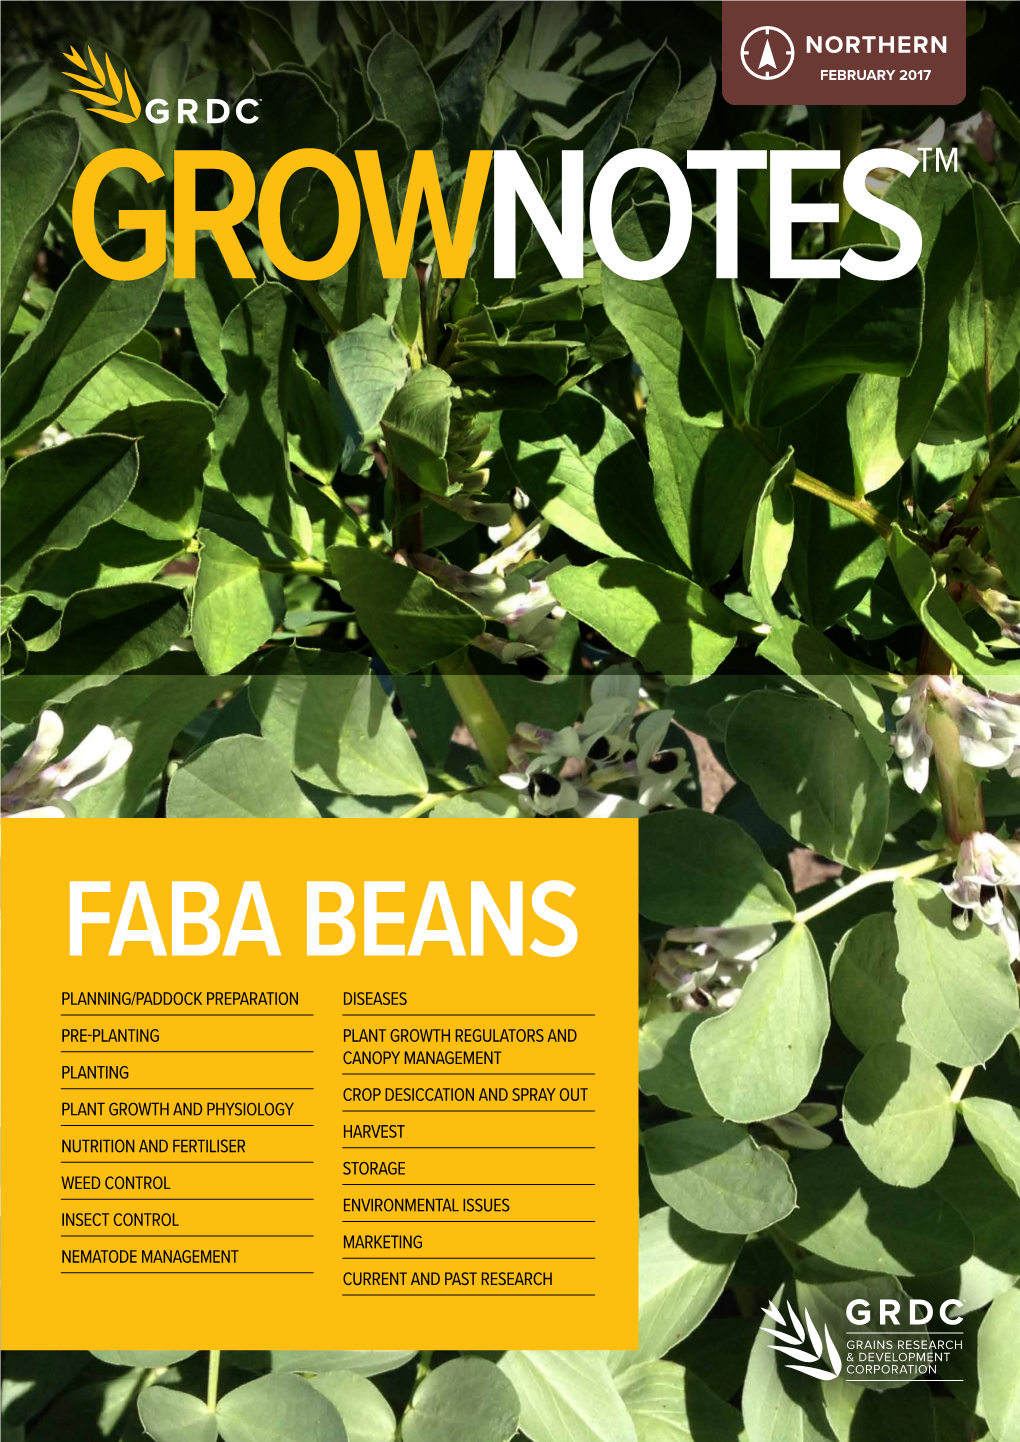 GRDC Grownotes: Faba Beans